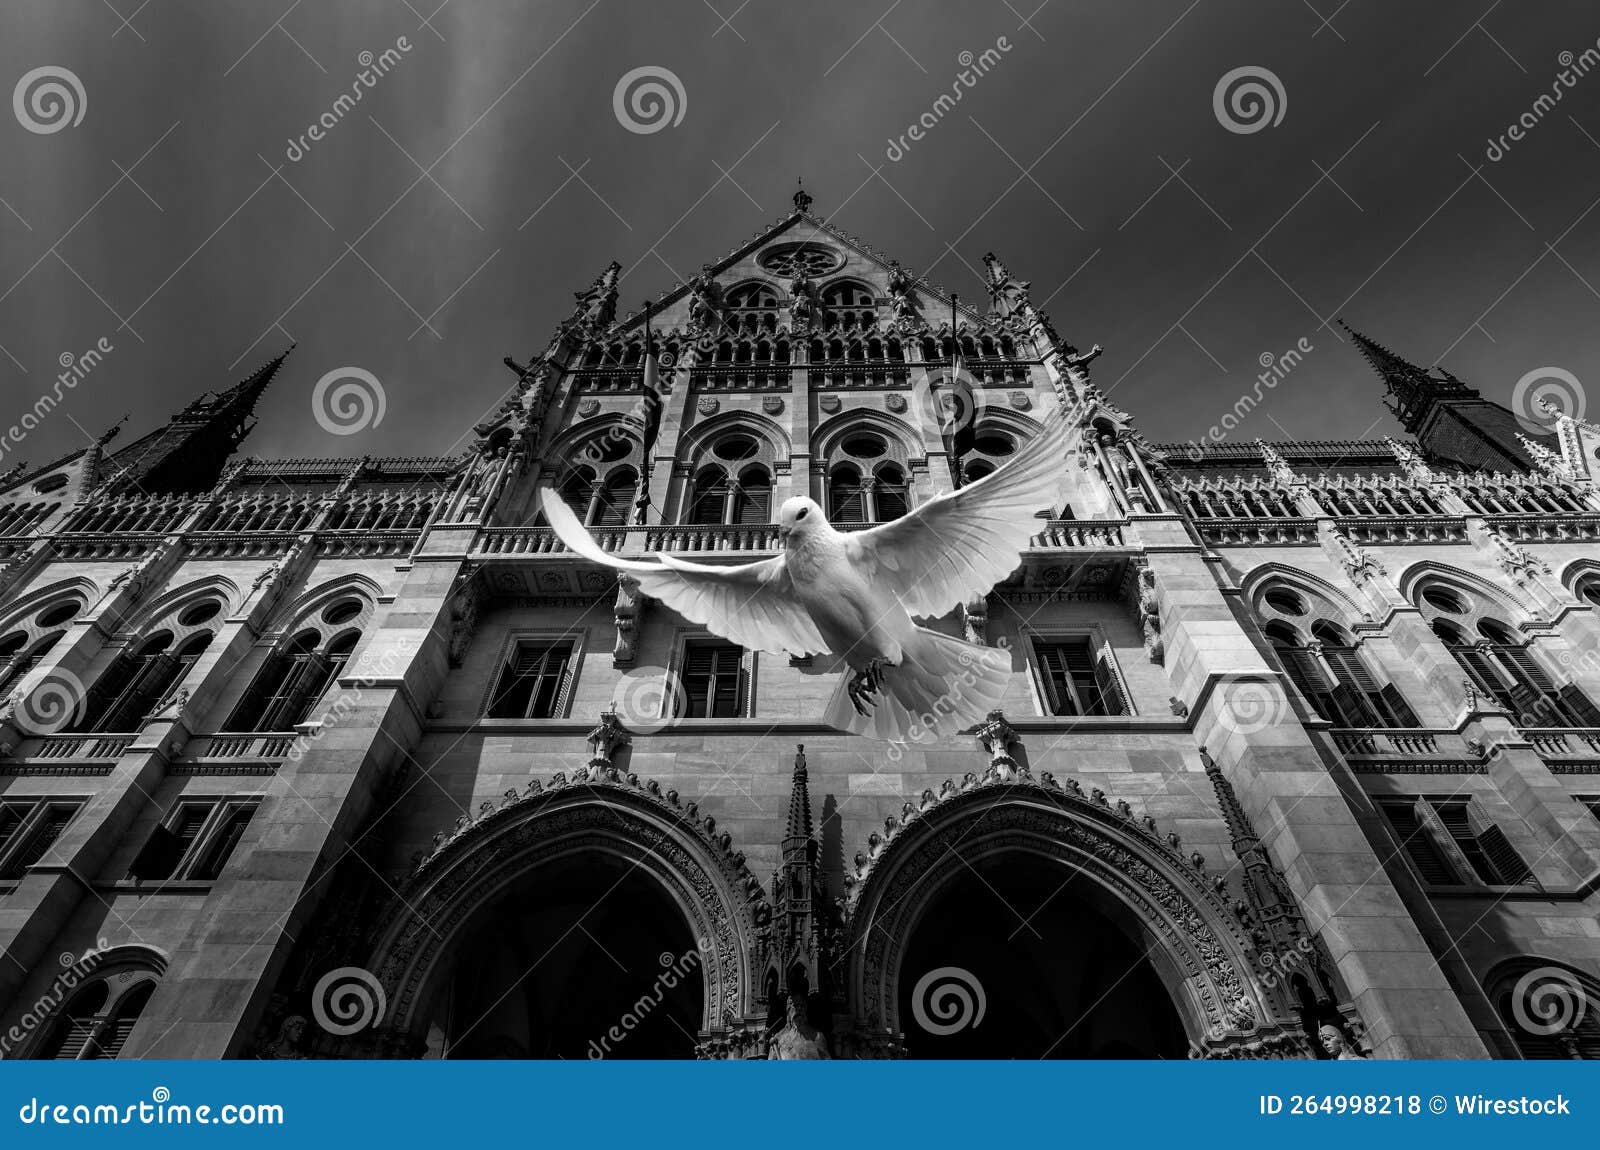 grayscale shot of a pigeon flying in front of the parlamento budapest - up in the air.